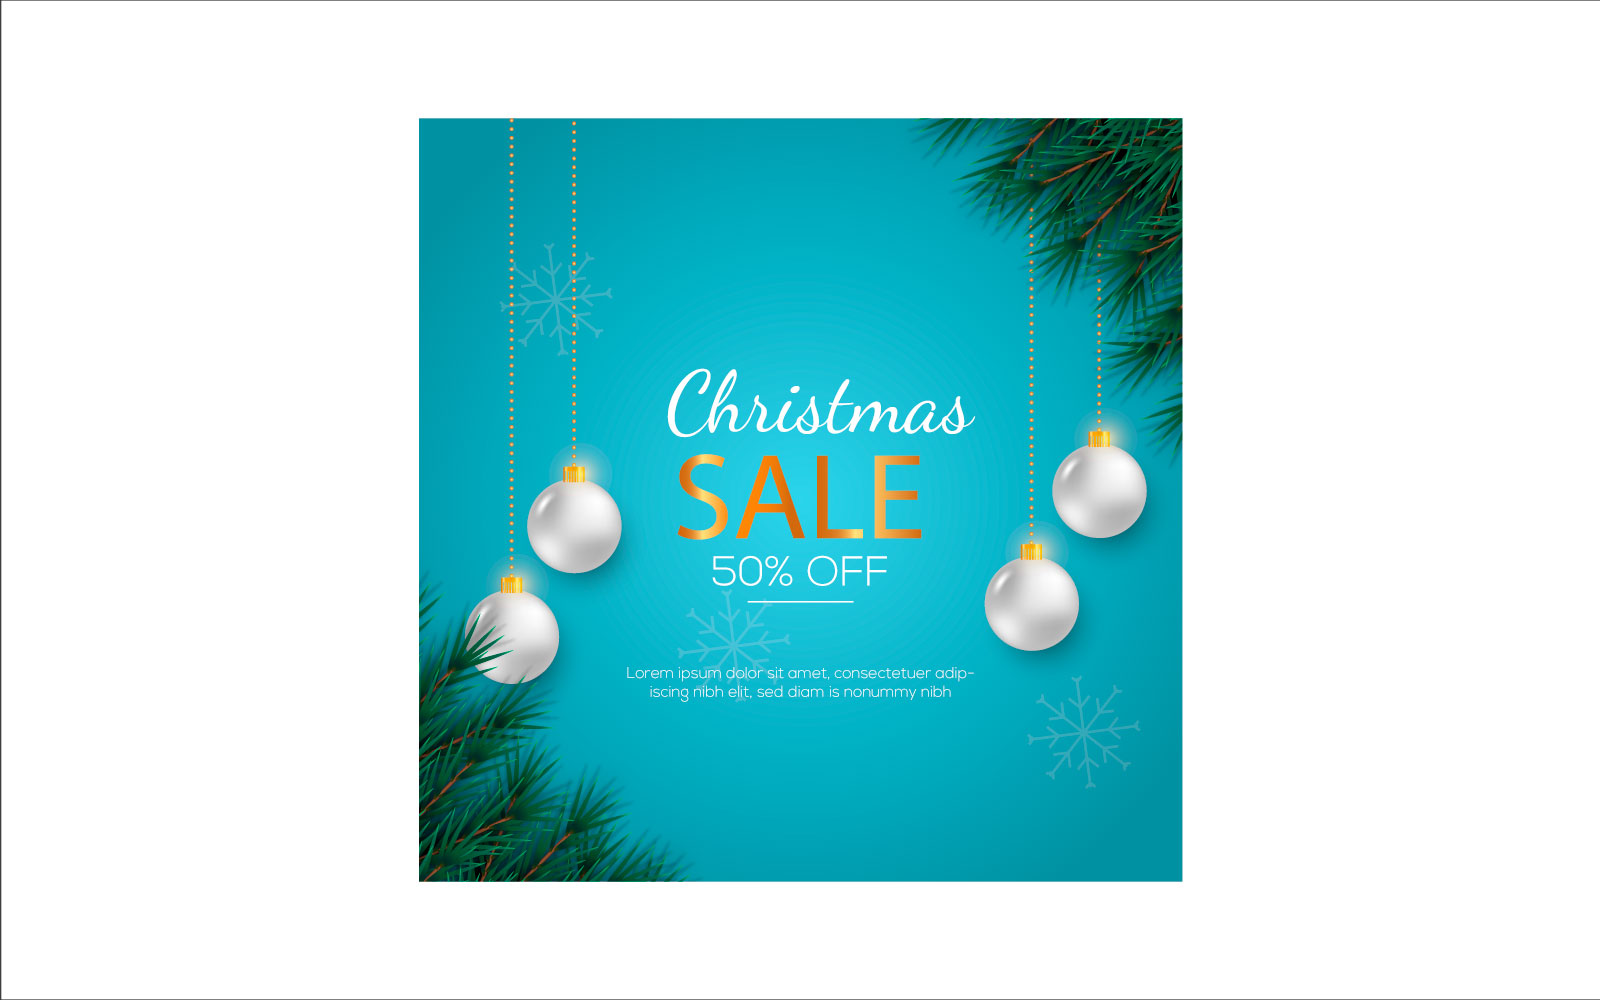 Merry Christmas sale post social media post decoration with pine branch and ball